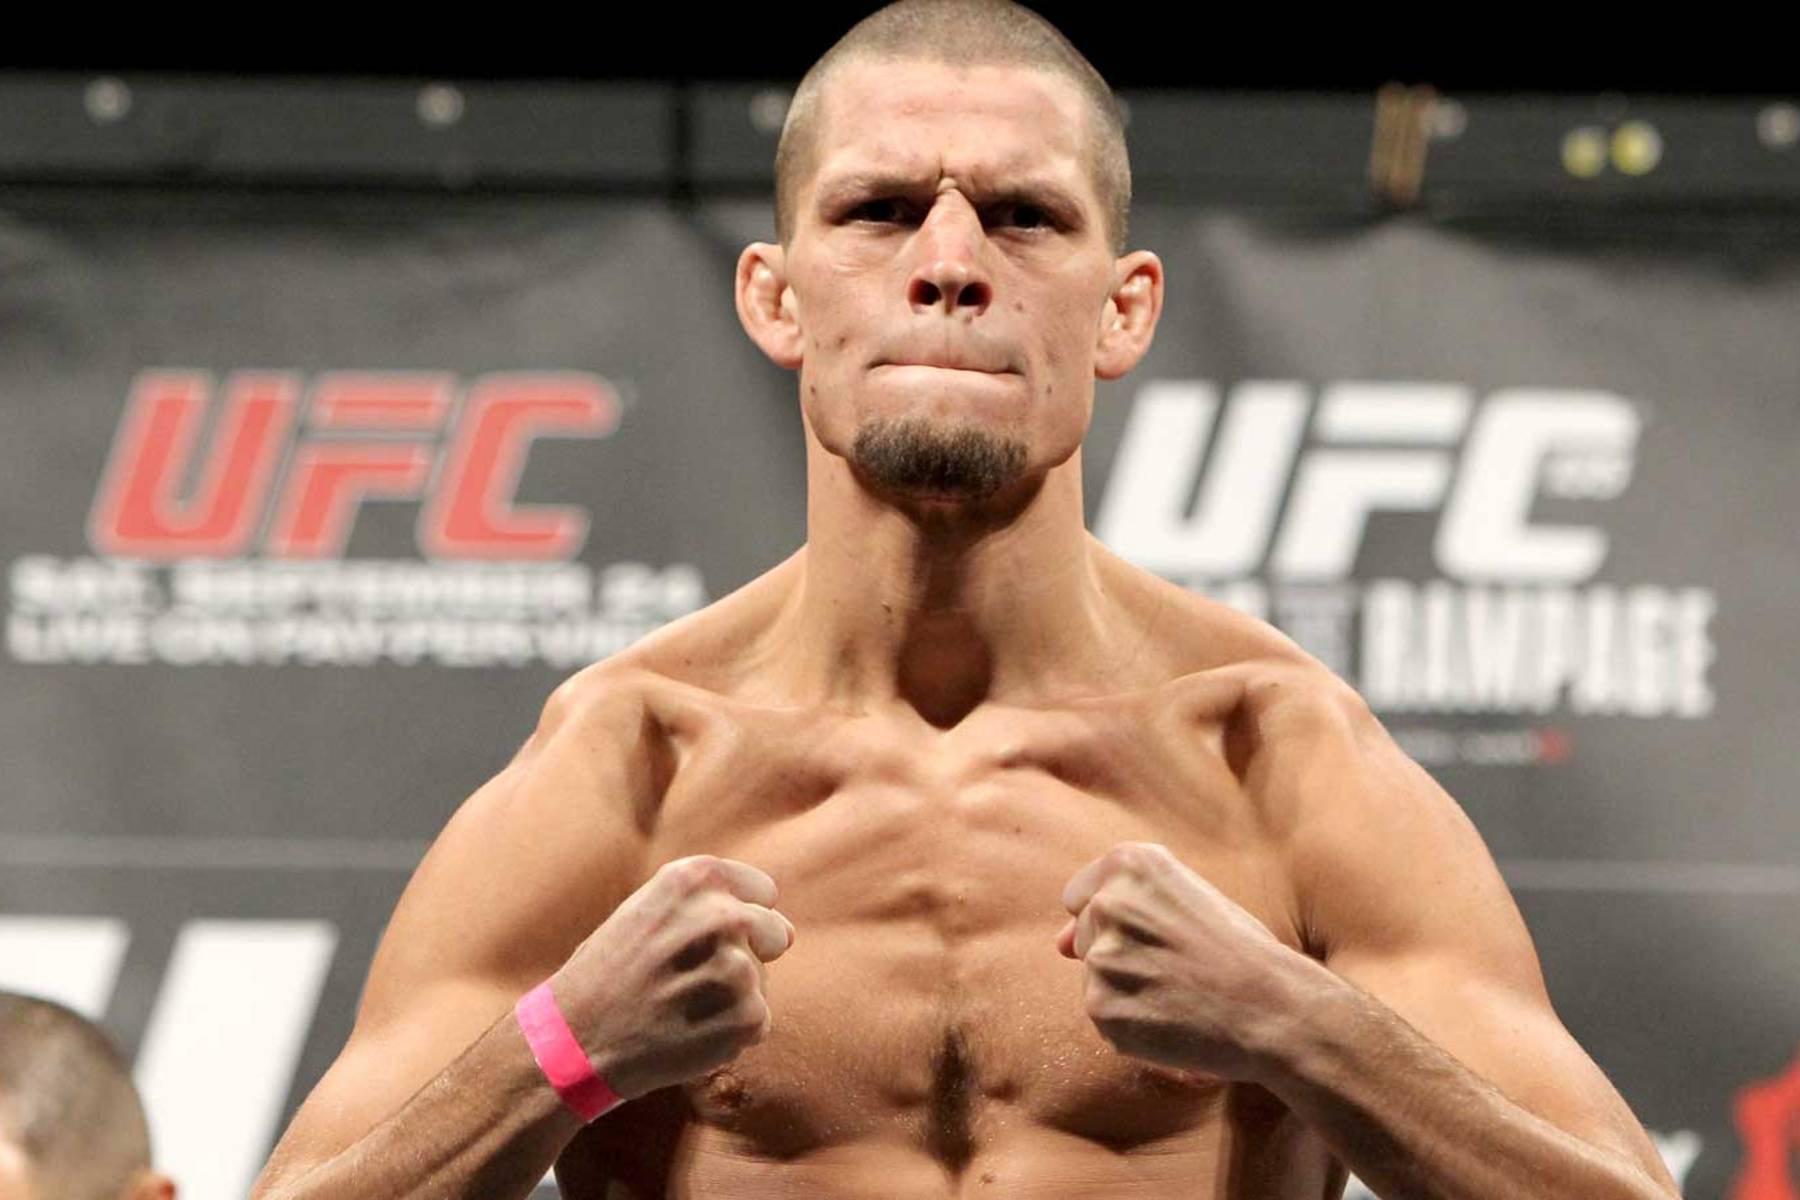 Nate Diaz Wallpaper Image Photo Picture Background